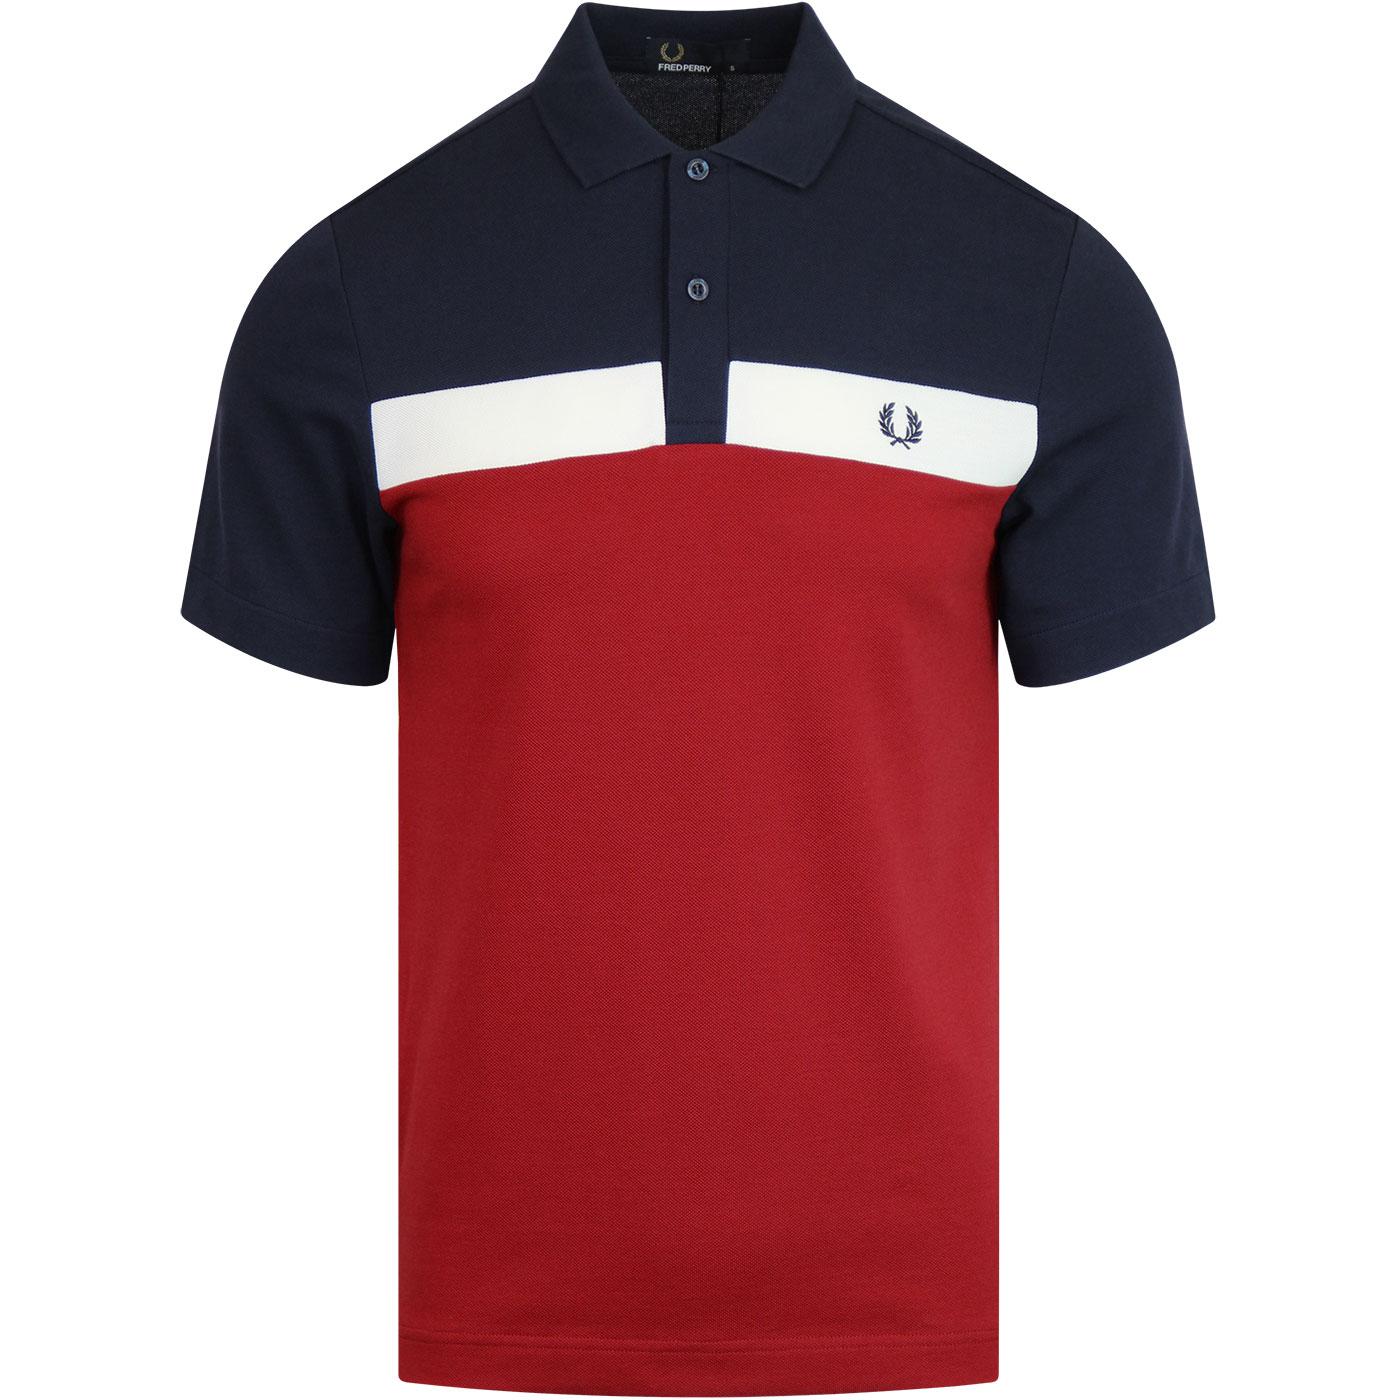 FRED PERRY Contrast Panel Mod Pique Polo RICH RED